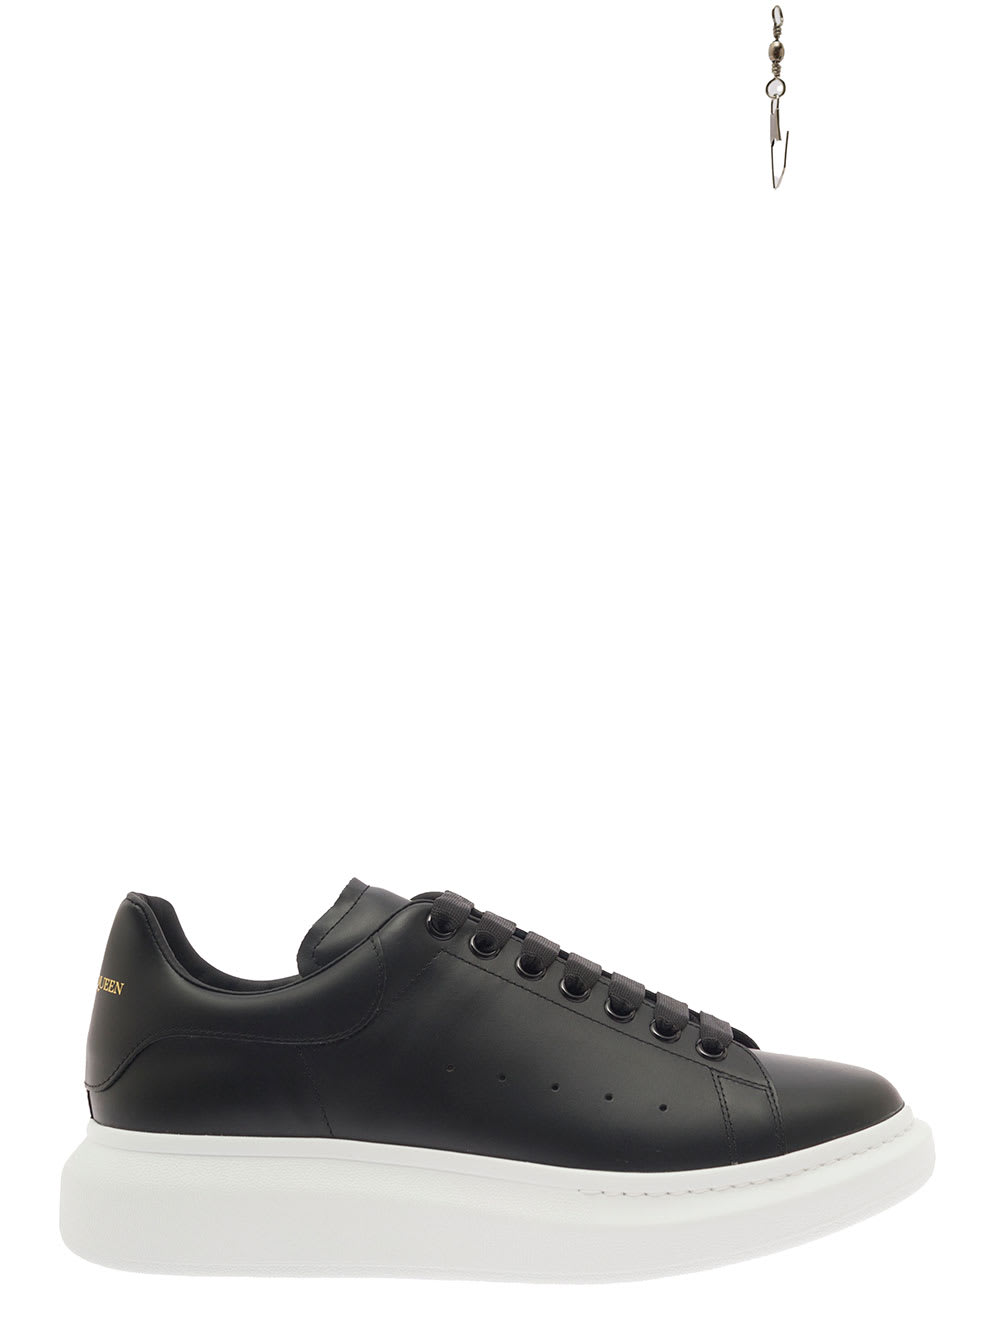 ALEXANDER MCQUEEN BLACK SNEAKERS WITH EMBOSSED LOGO ON TONAL STITCHING IN LEATHER MAN